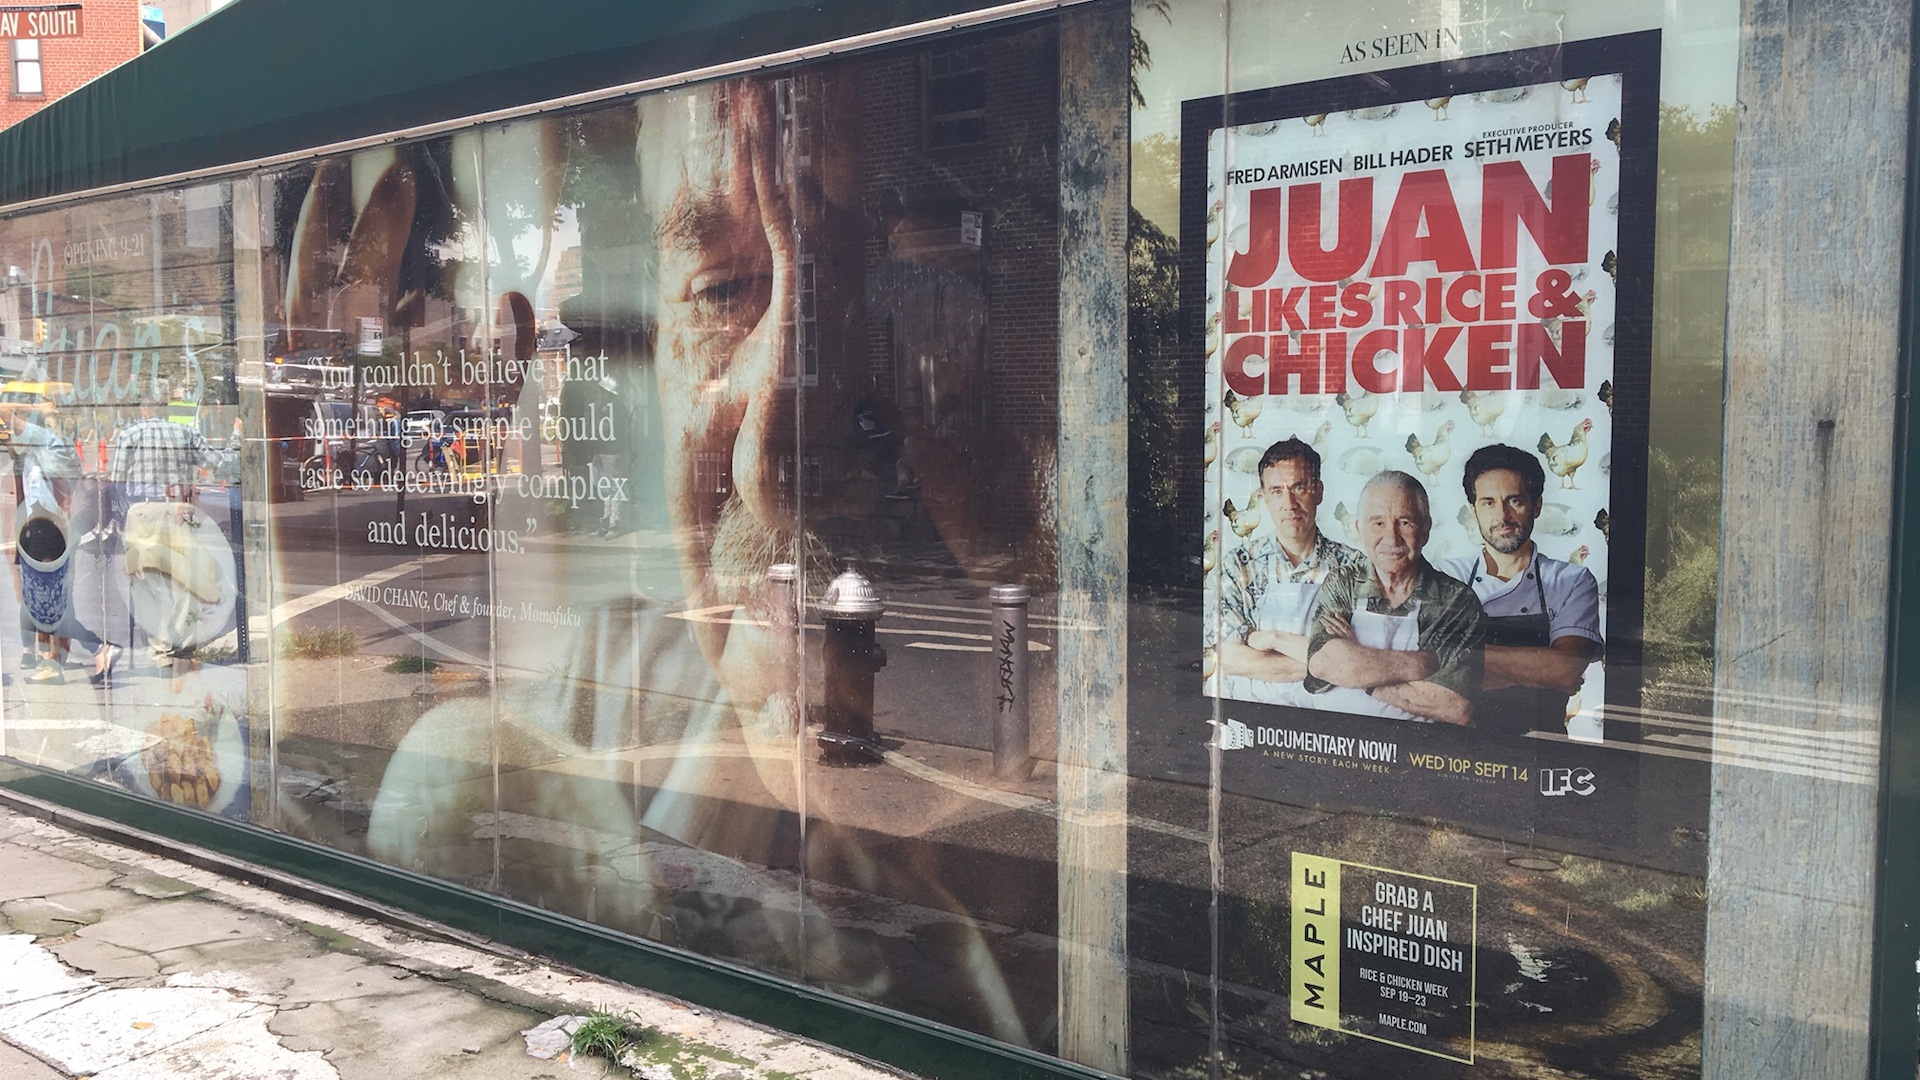 Juan's Rice & Chicken Storefront Pops Up NYC